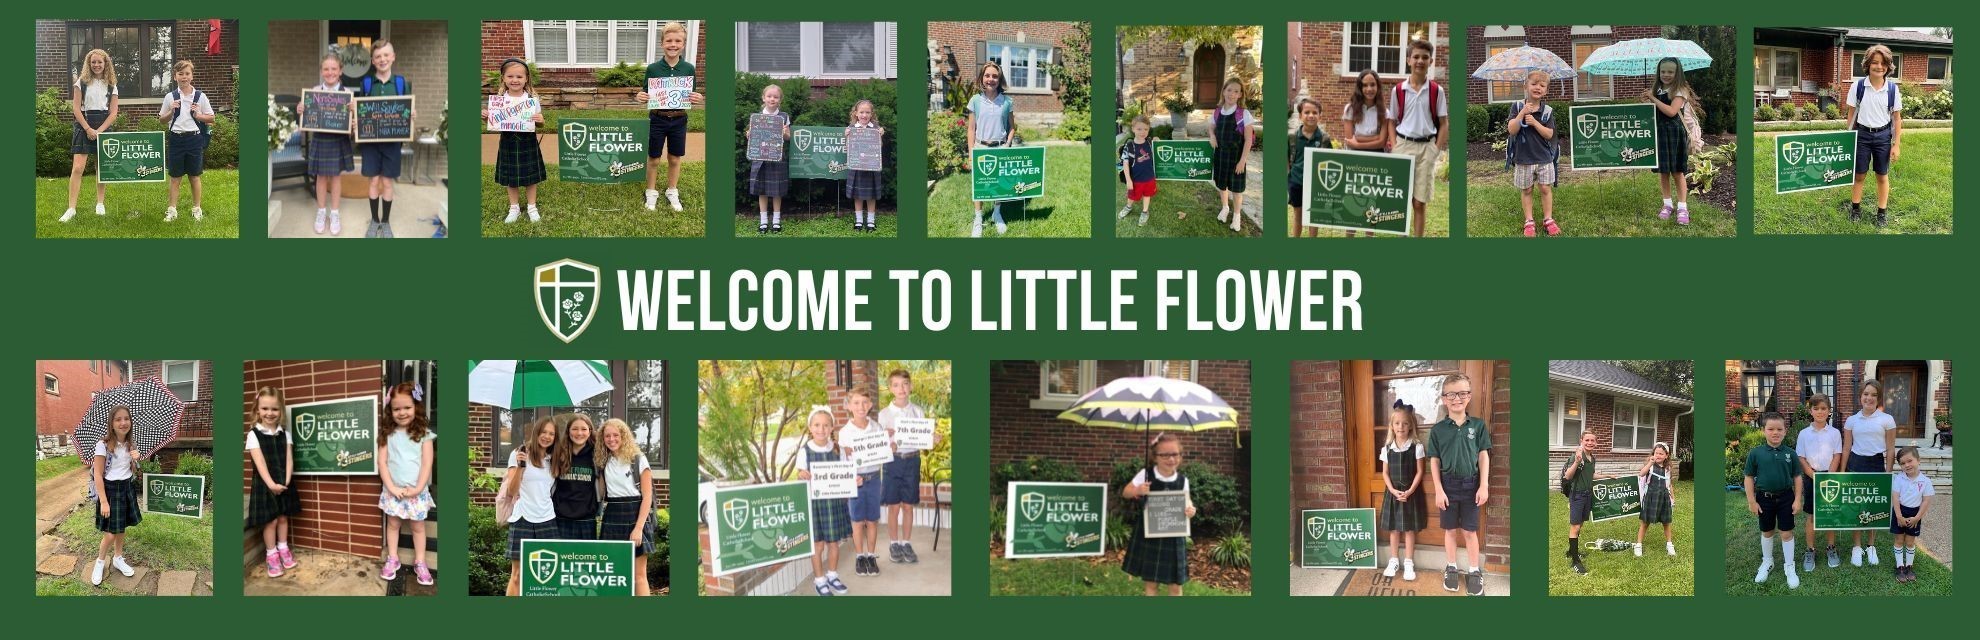 Welcome to Little Flower with students of various ages holding the welcome to Little Flower sign.